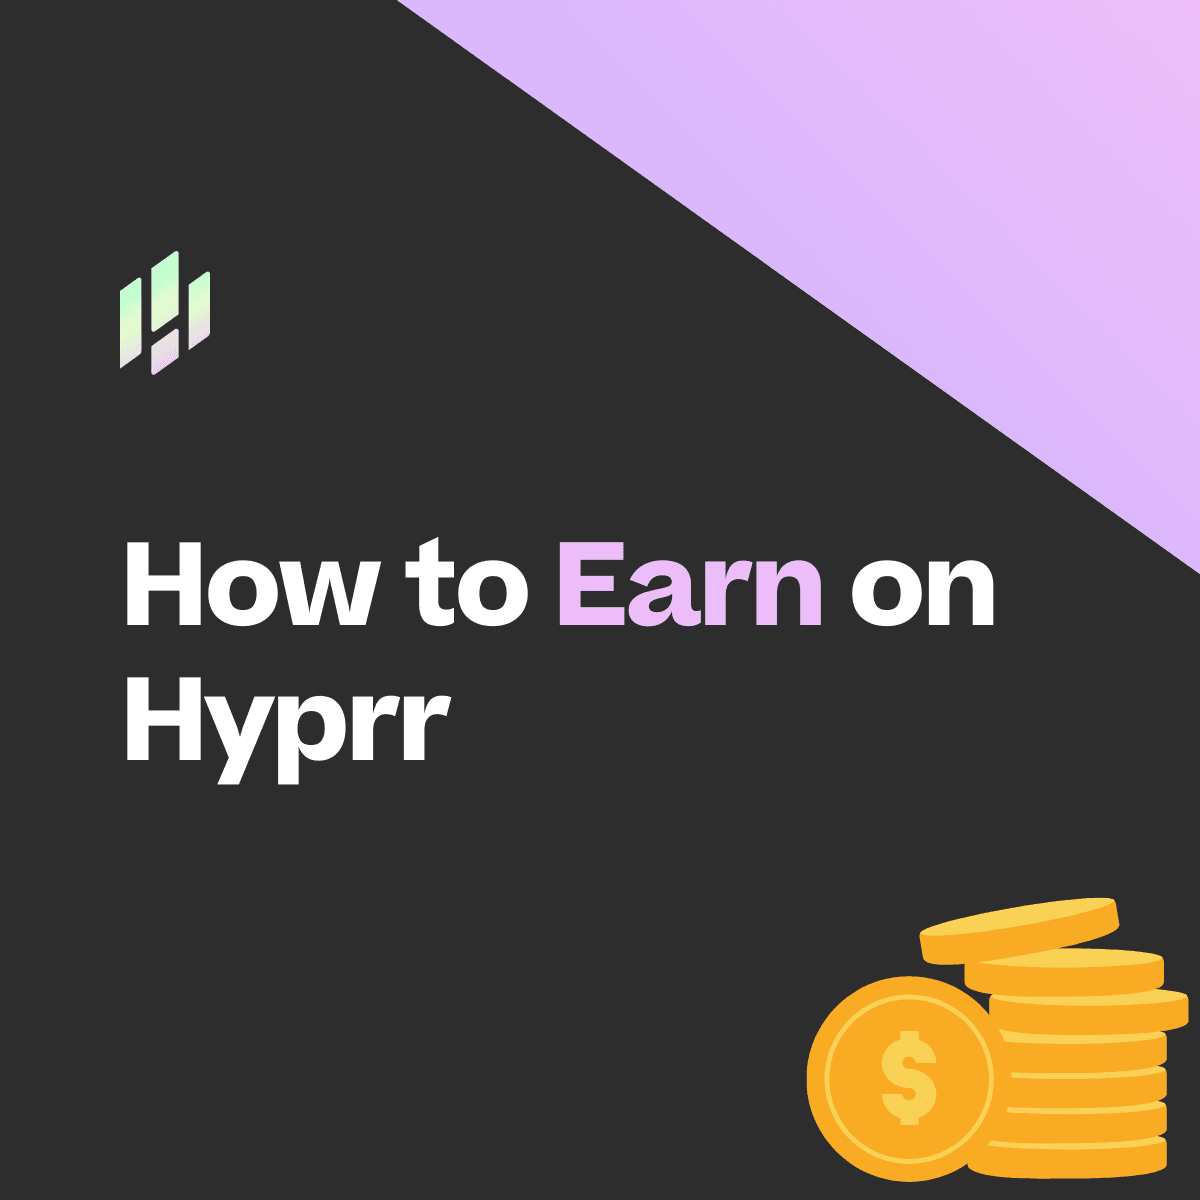 How to Earn on Hyprr